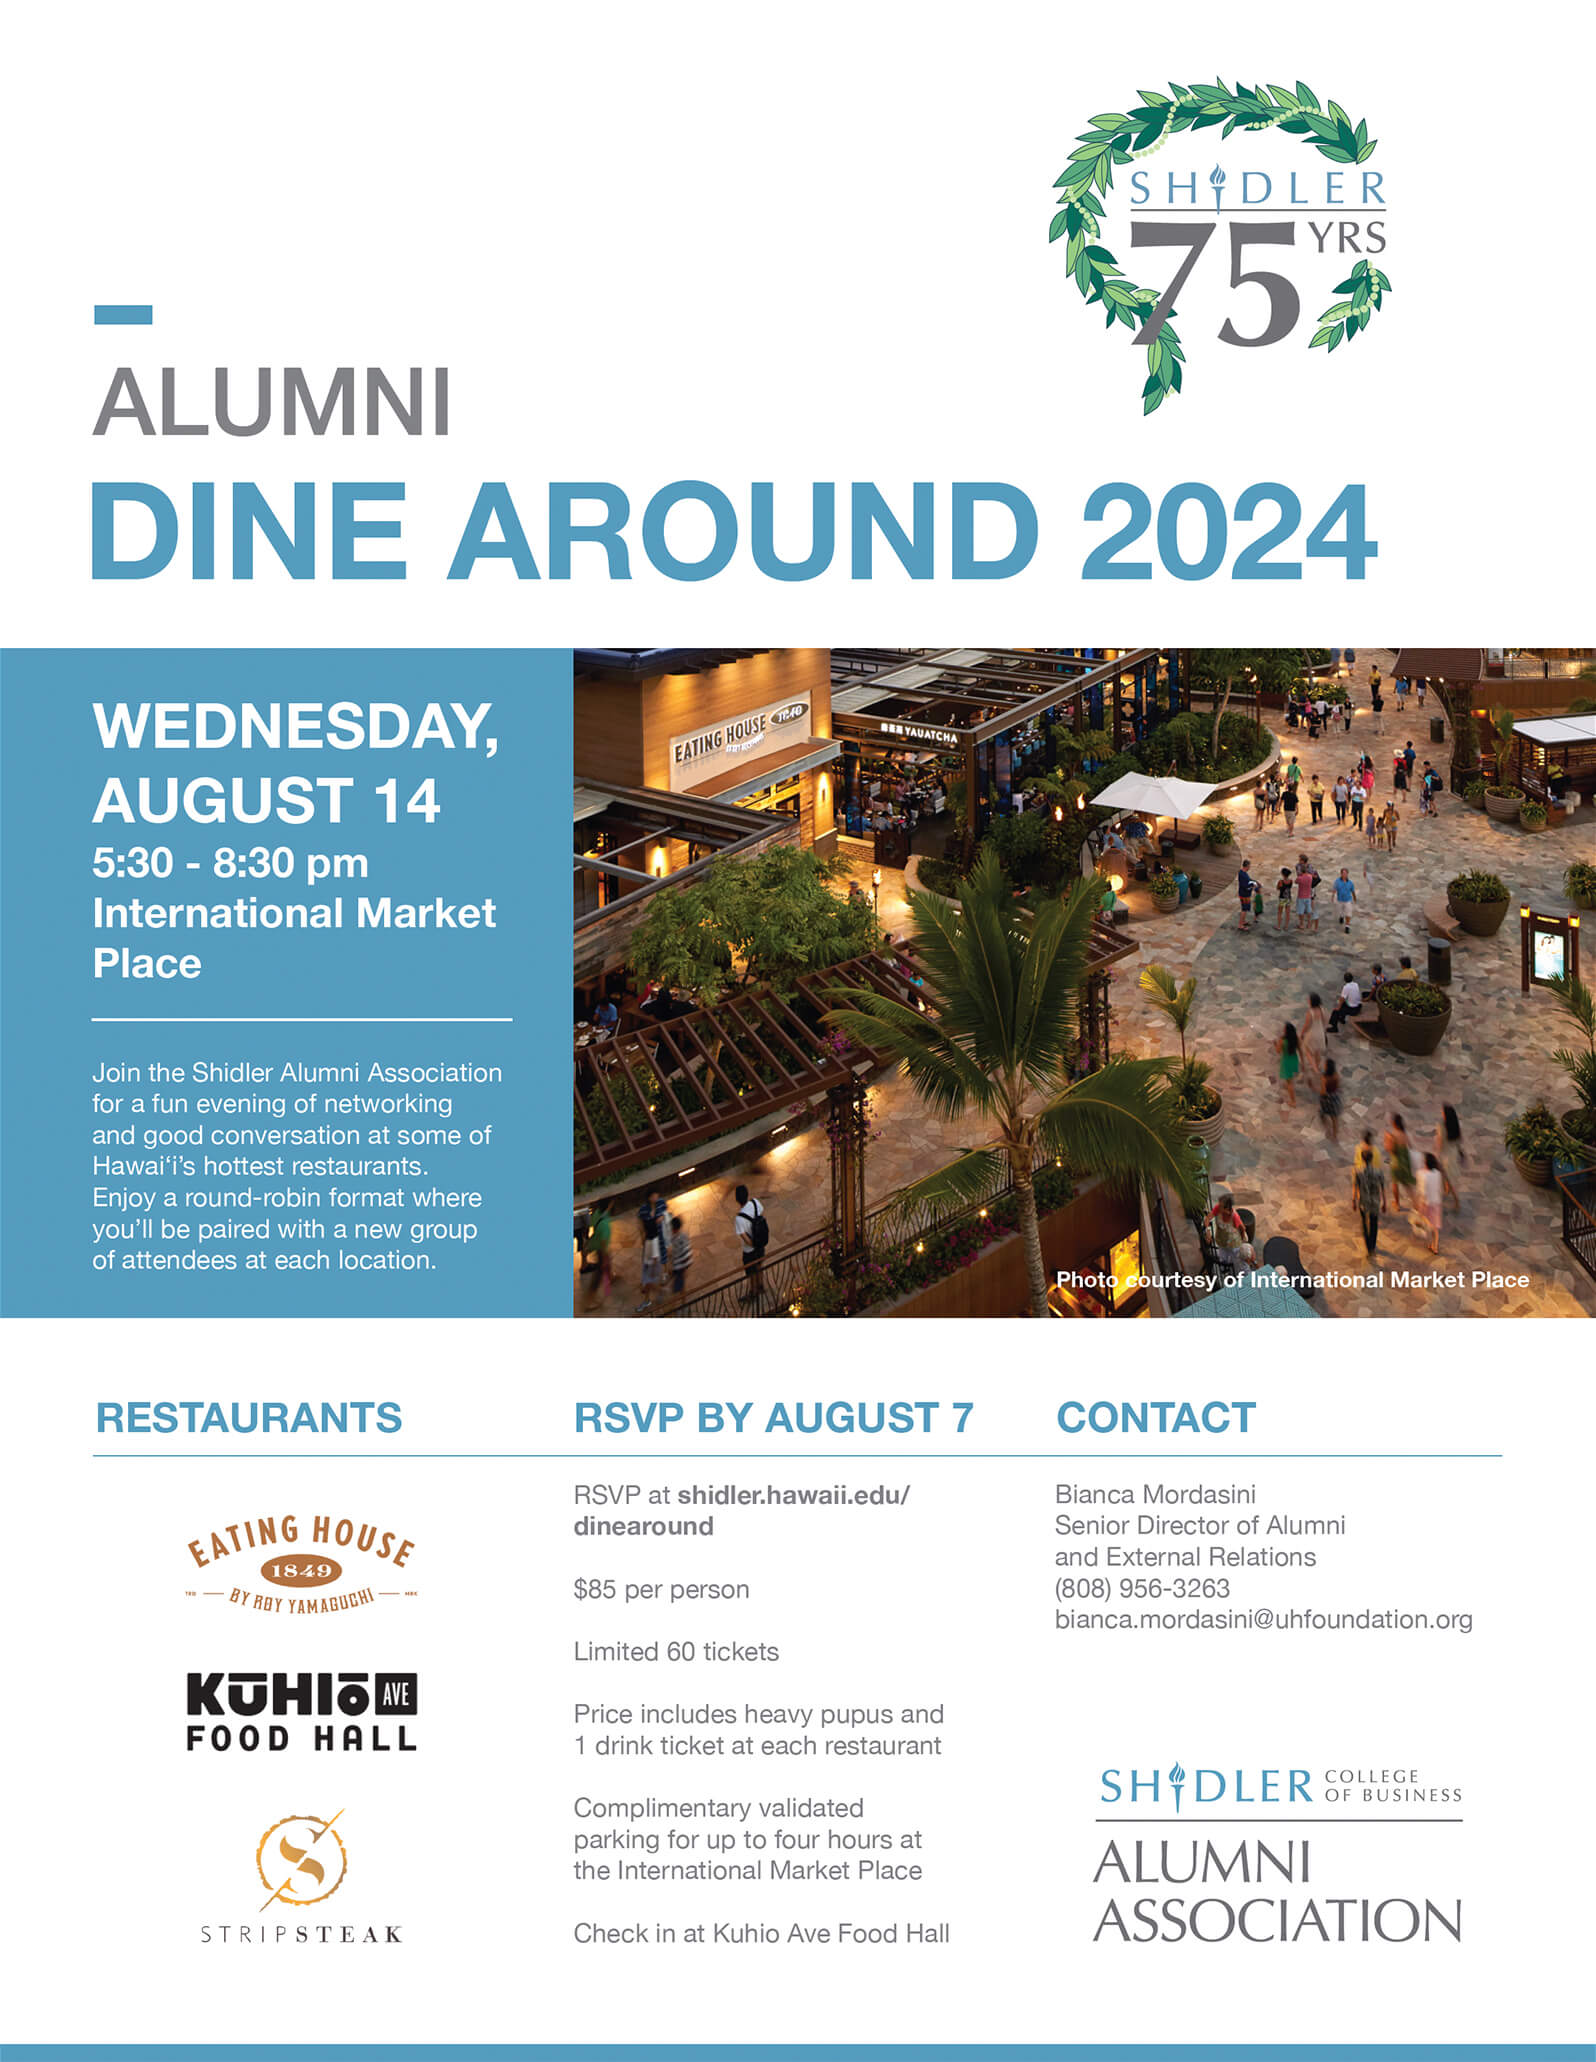 Wednesday, August 14. 5:30 - 8:30 pm. International Market Place. Join the Shidler Alumni Association for a fun evening of networking and good conversation at some of Hawai‘i’s hottest restaurants. Enjoy a round-robin format where you’ll be paired with a new group of attendees at each location.